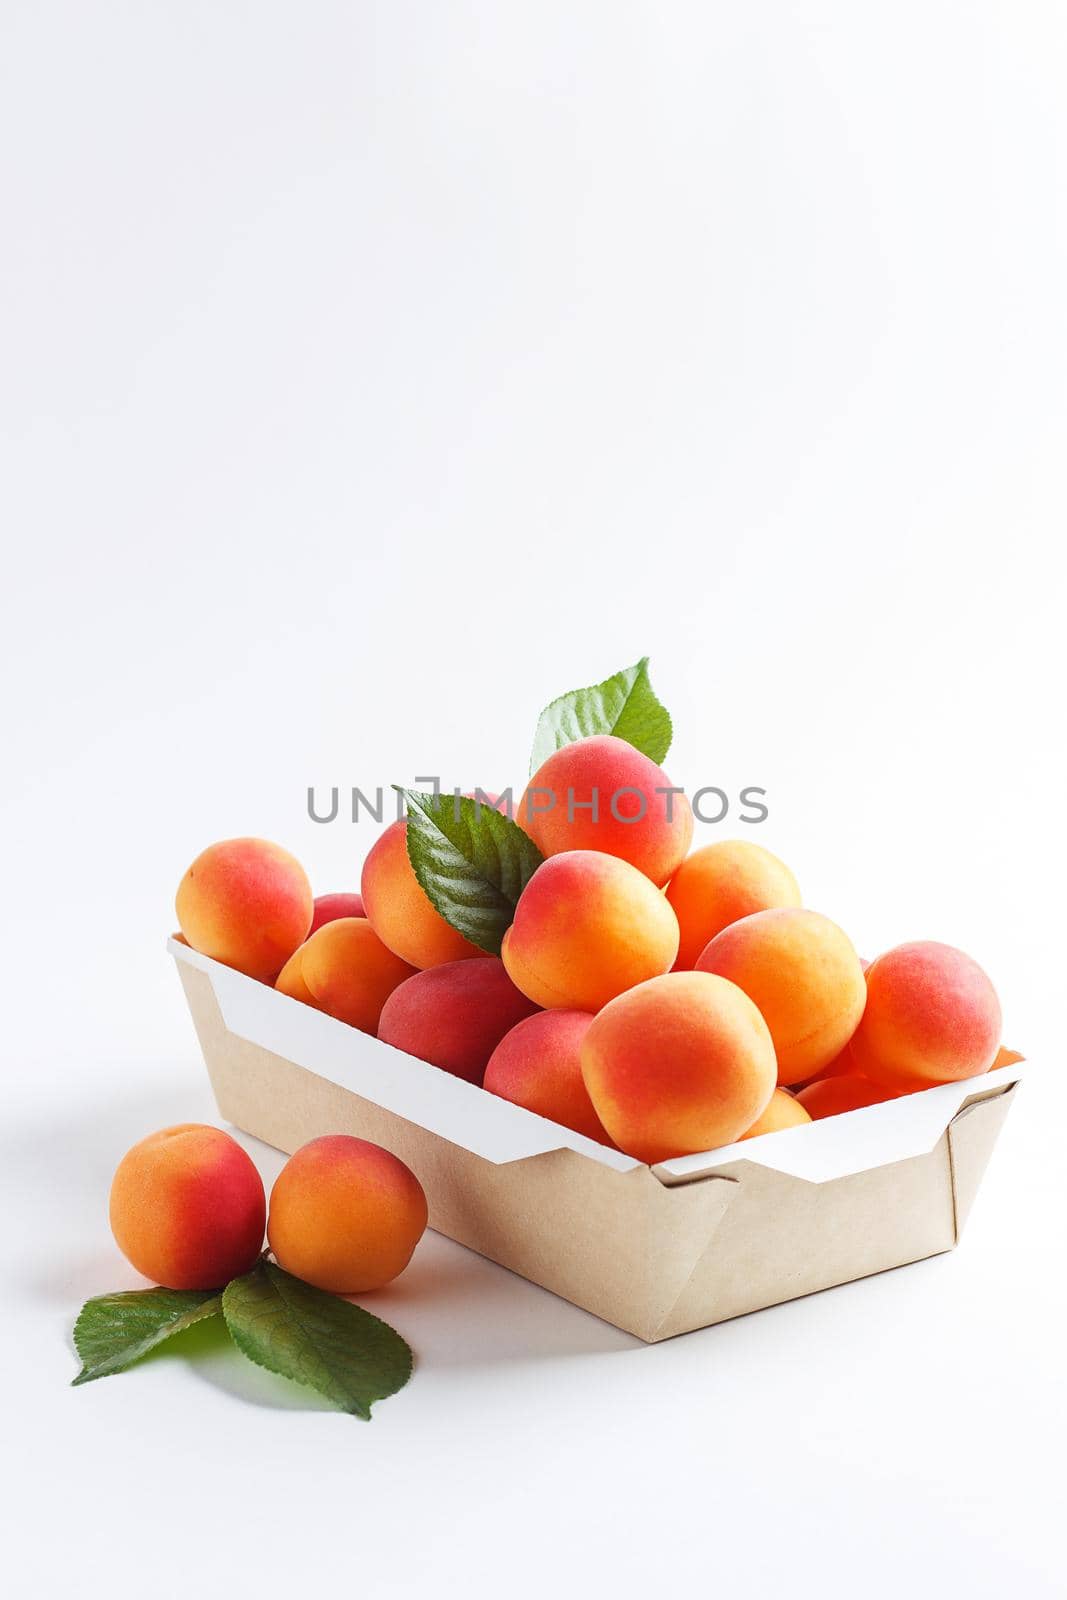 Apricots in paper packaging on a white background. the concept of eco-friendly packaging without plastic. Copy space